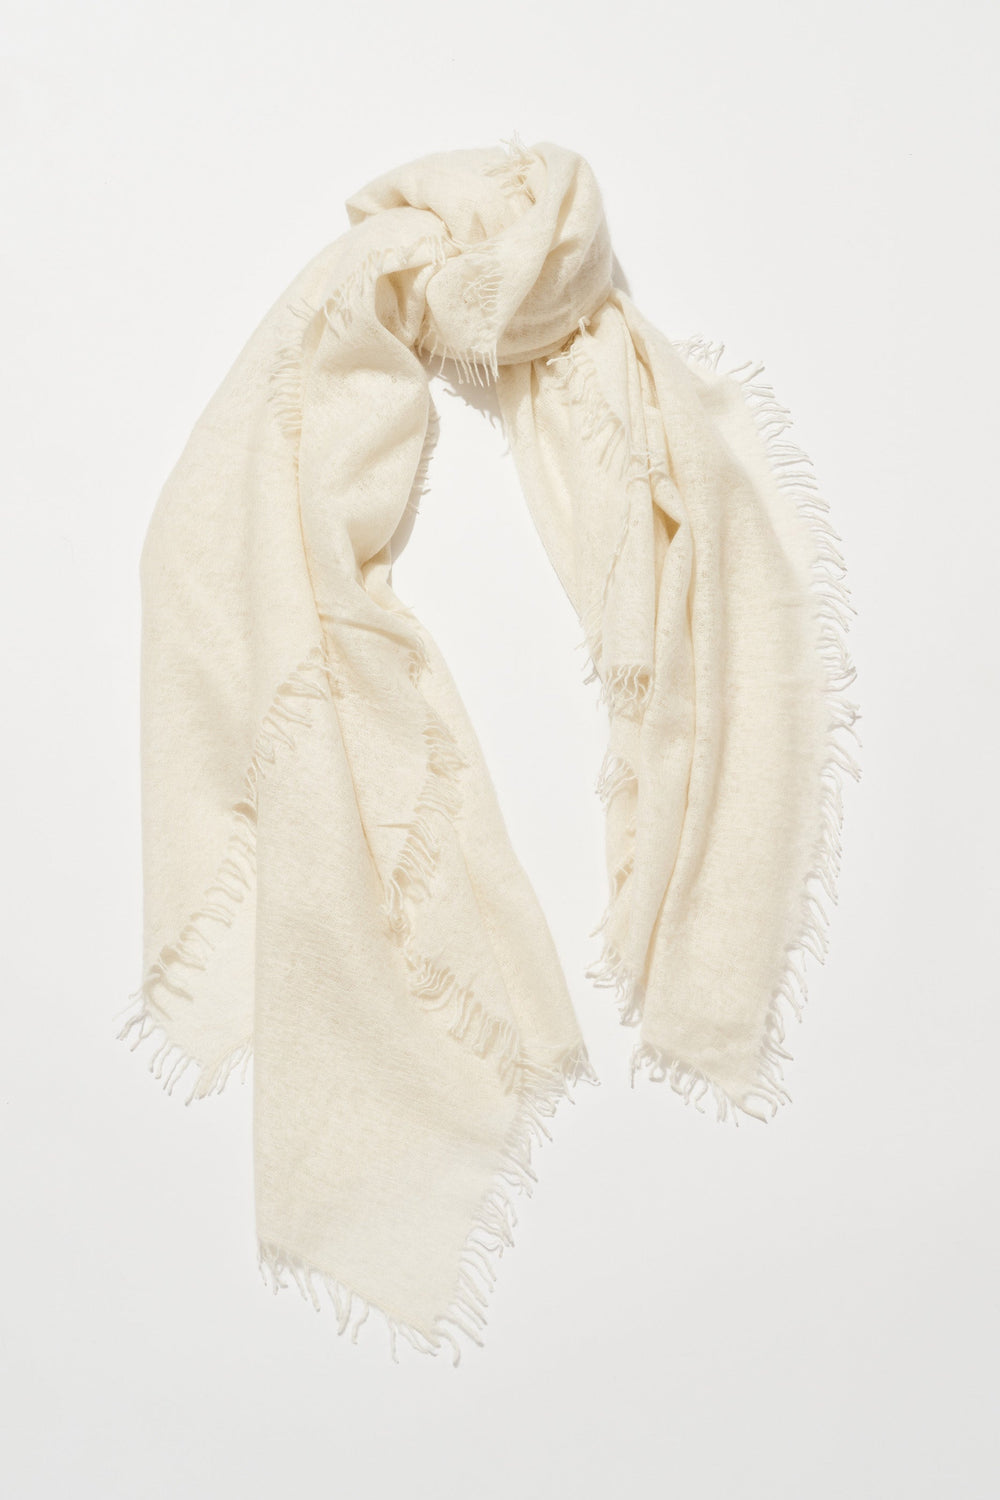 Cashmere Felted Stole in Cloud Dancer